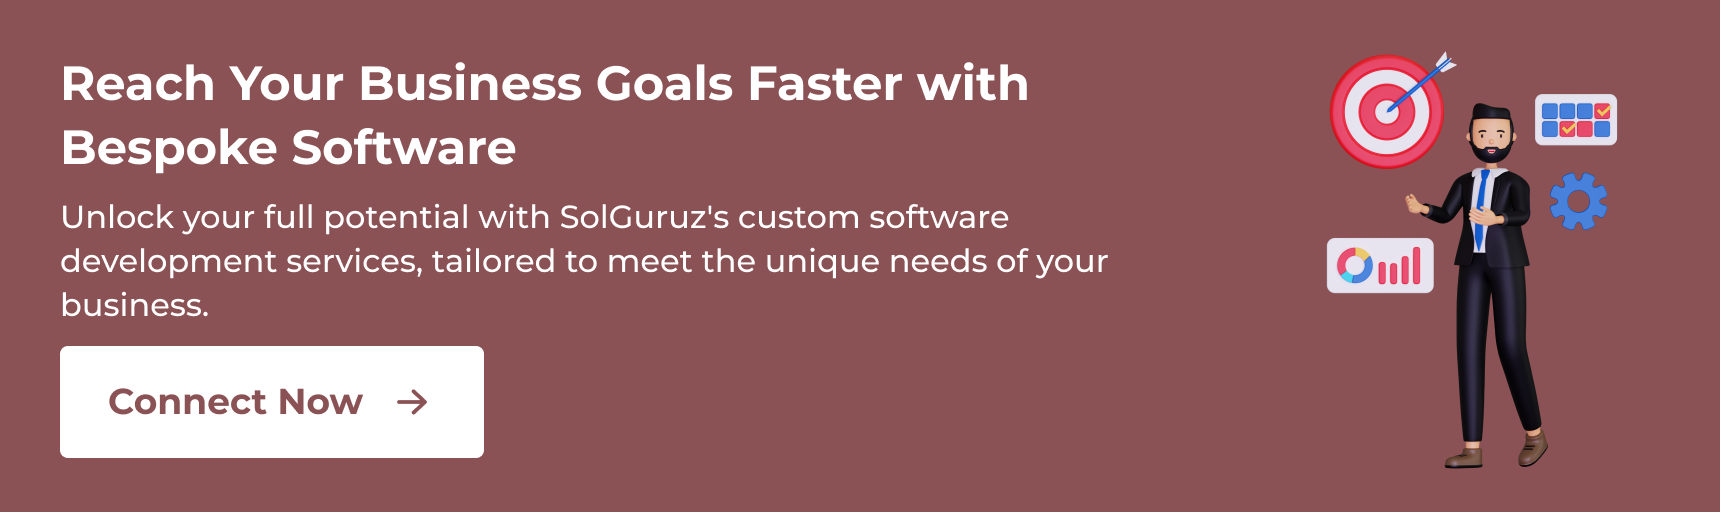 Reach Your Business Goals Faster with Bespoke Software